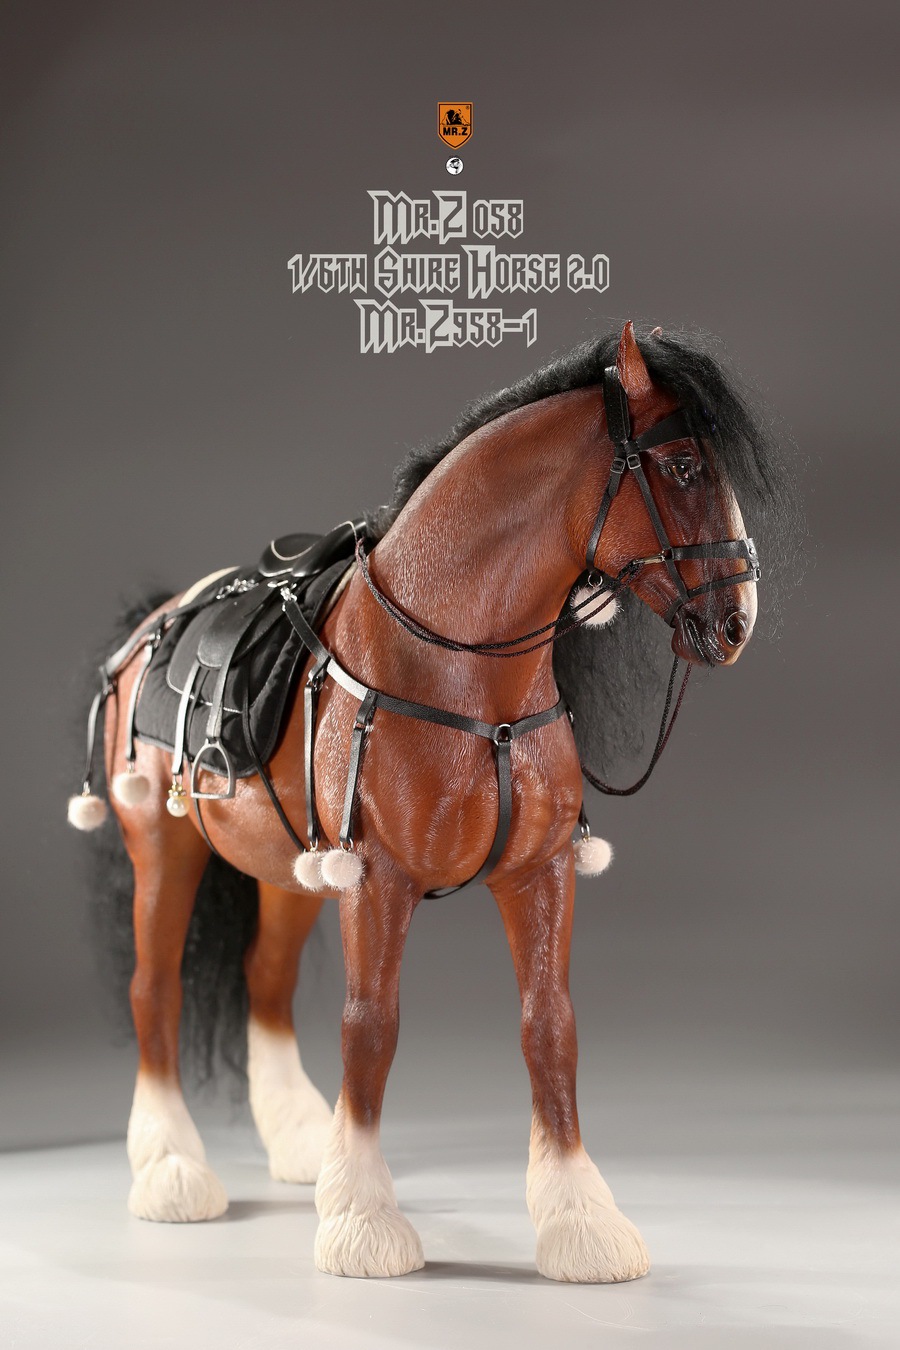 NEW PRODUCT: MR. Z: 58th round-Shire Horse 2.0 version full set of 5 colors  08573910